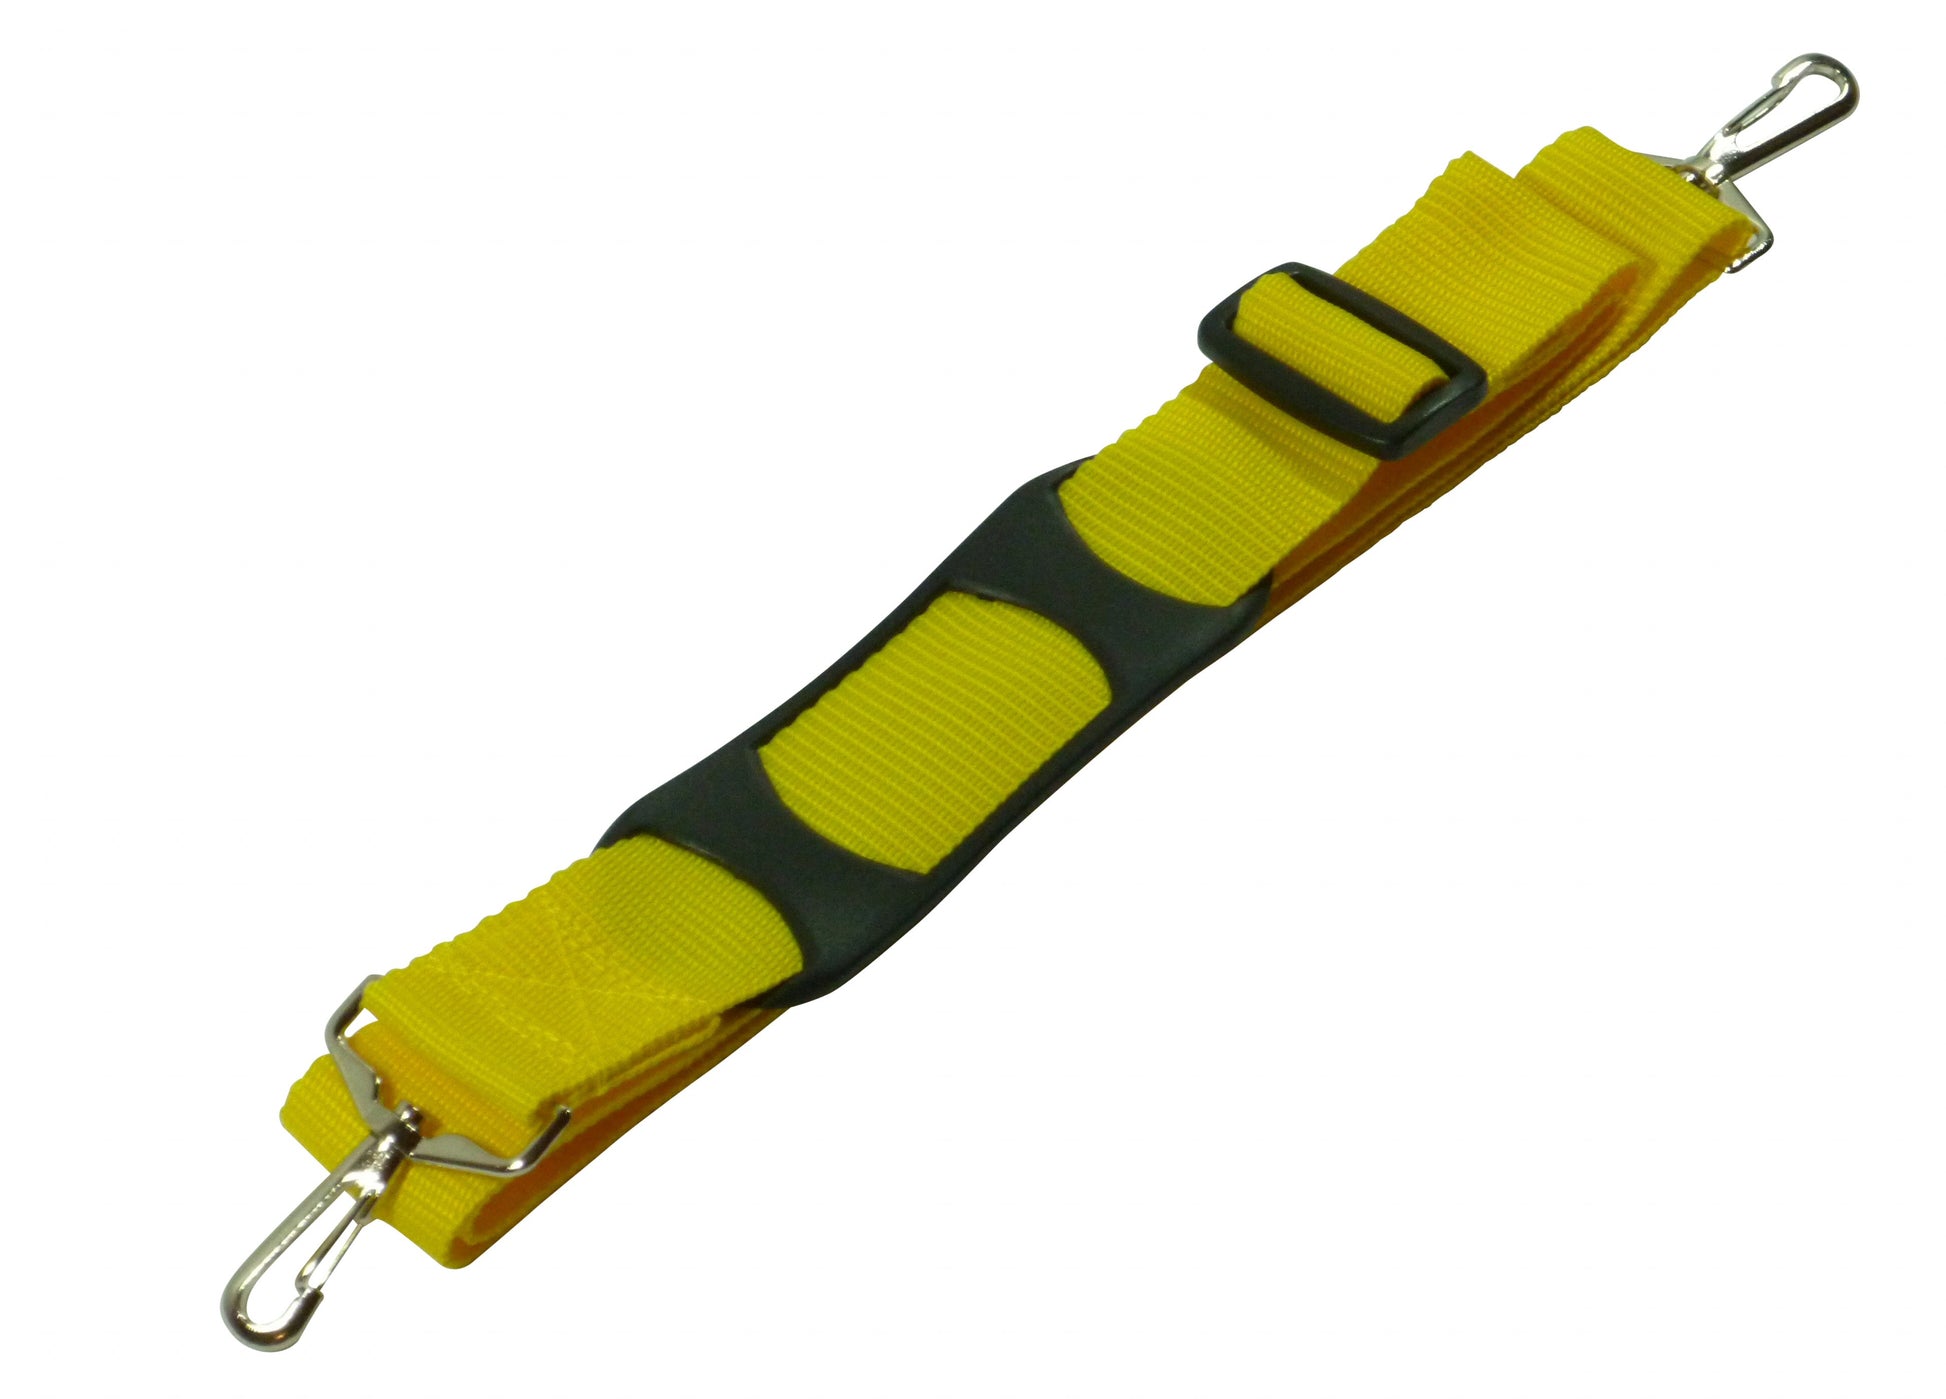 38mm Bag Strap with Metal Buckles and Shoulder Pad, 150cm in yellow